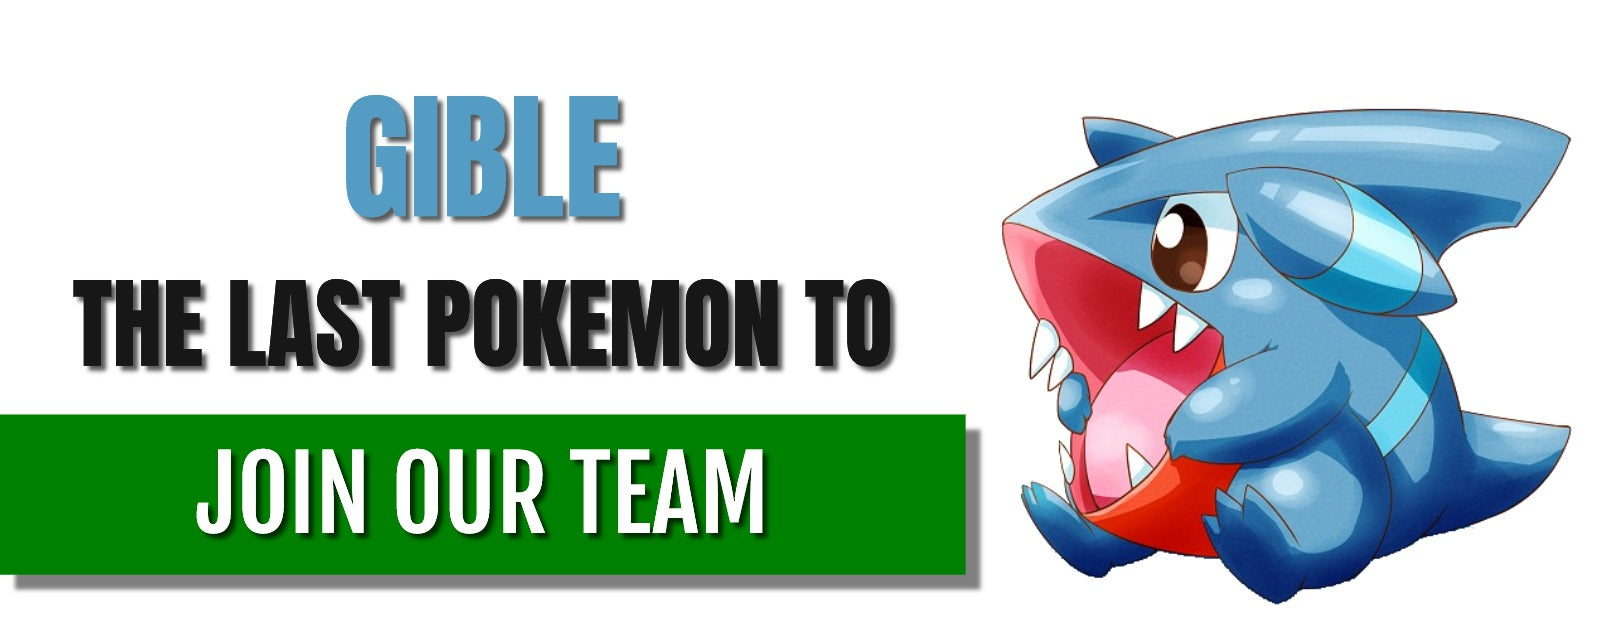 gible the last pokemon to join our team